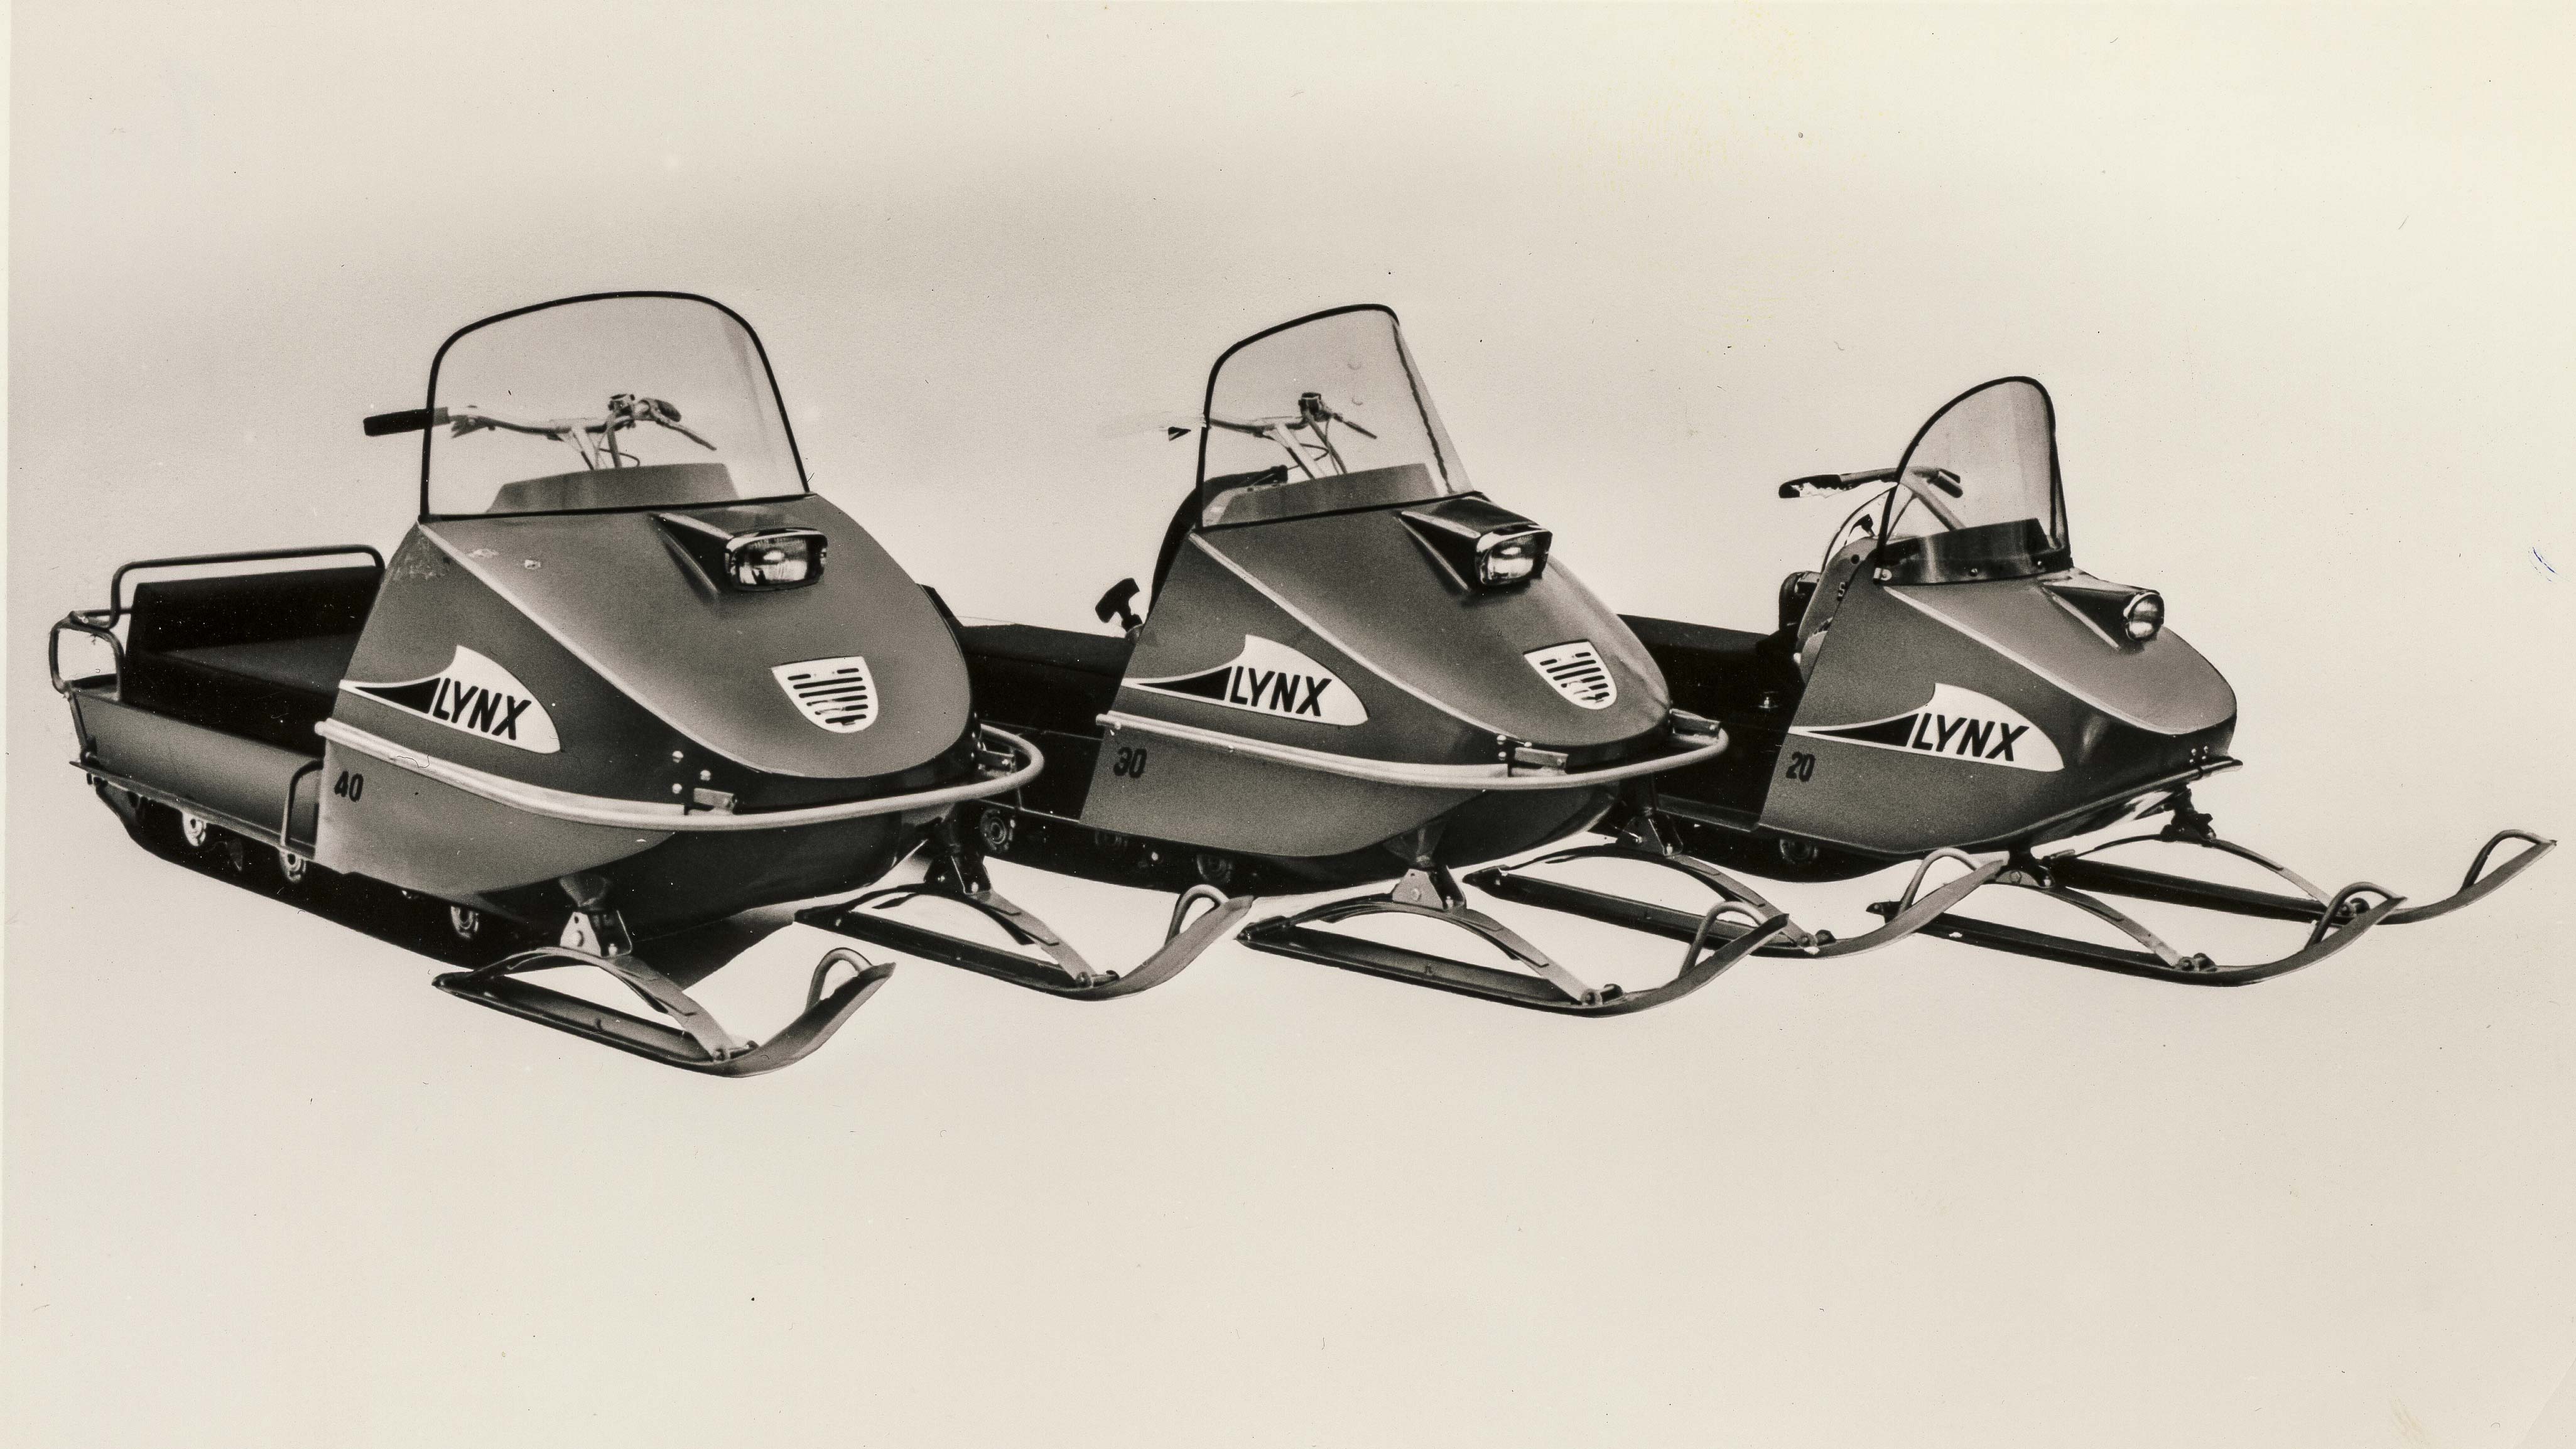 Three old Lynx snowmobiles in a row in studio